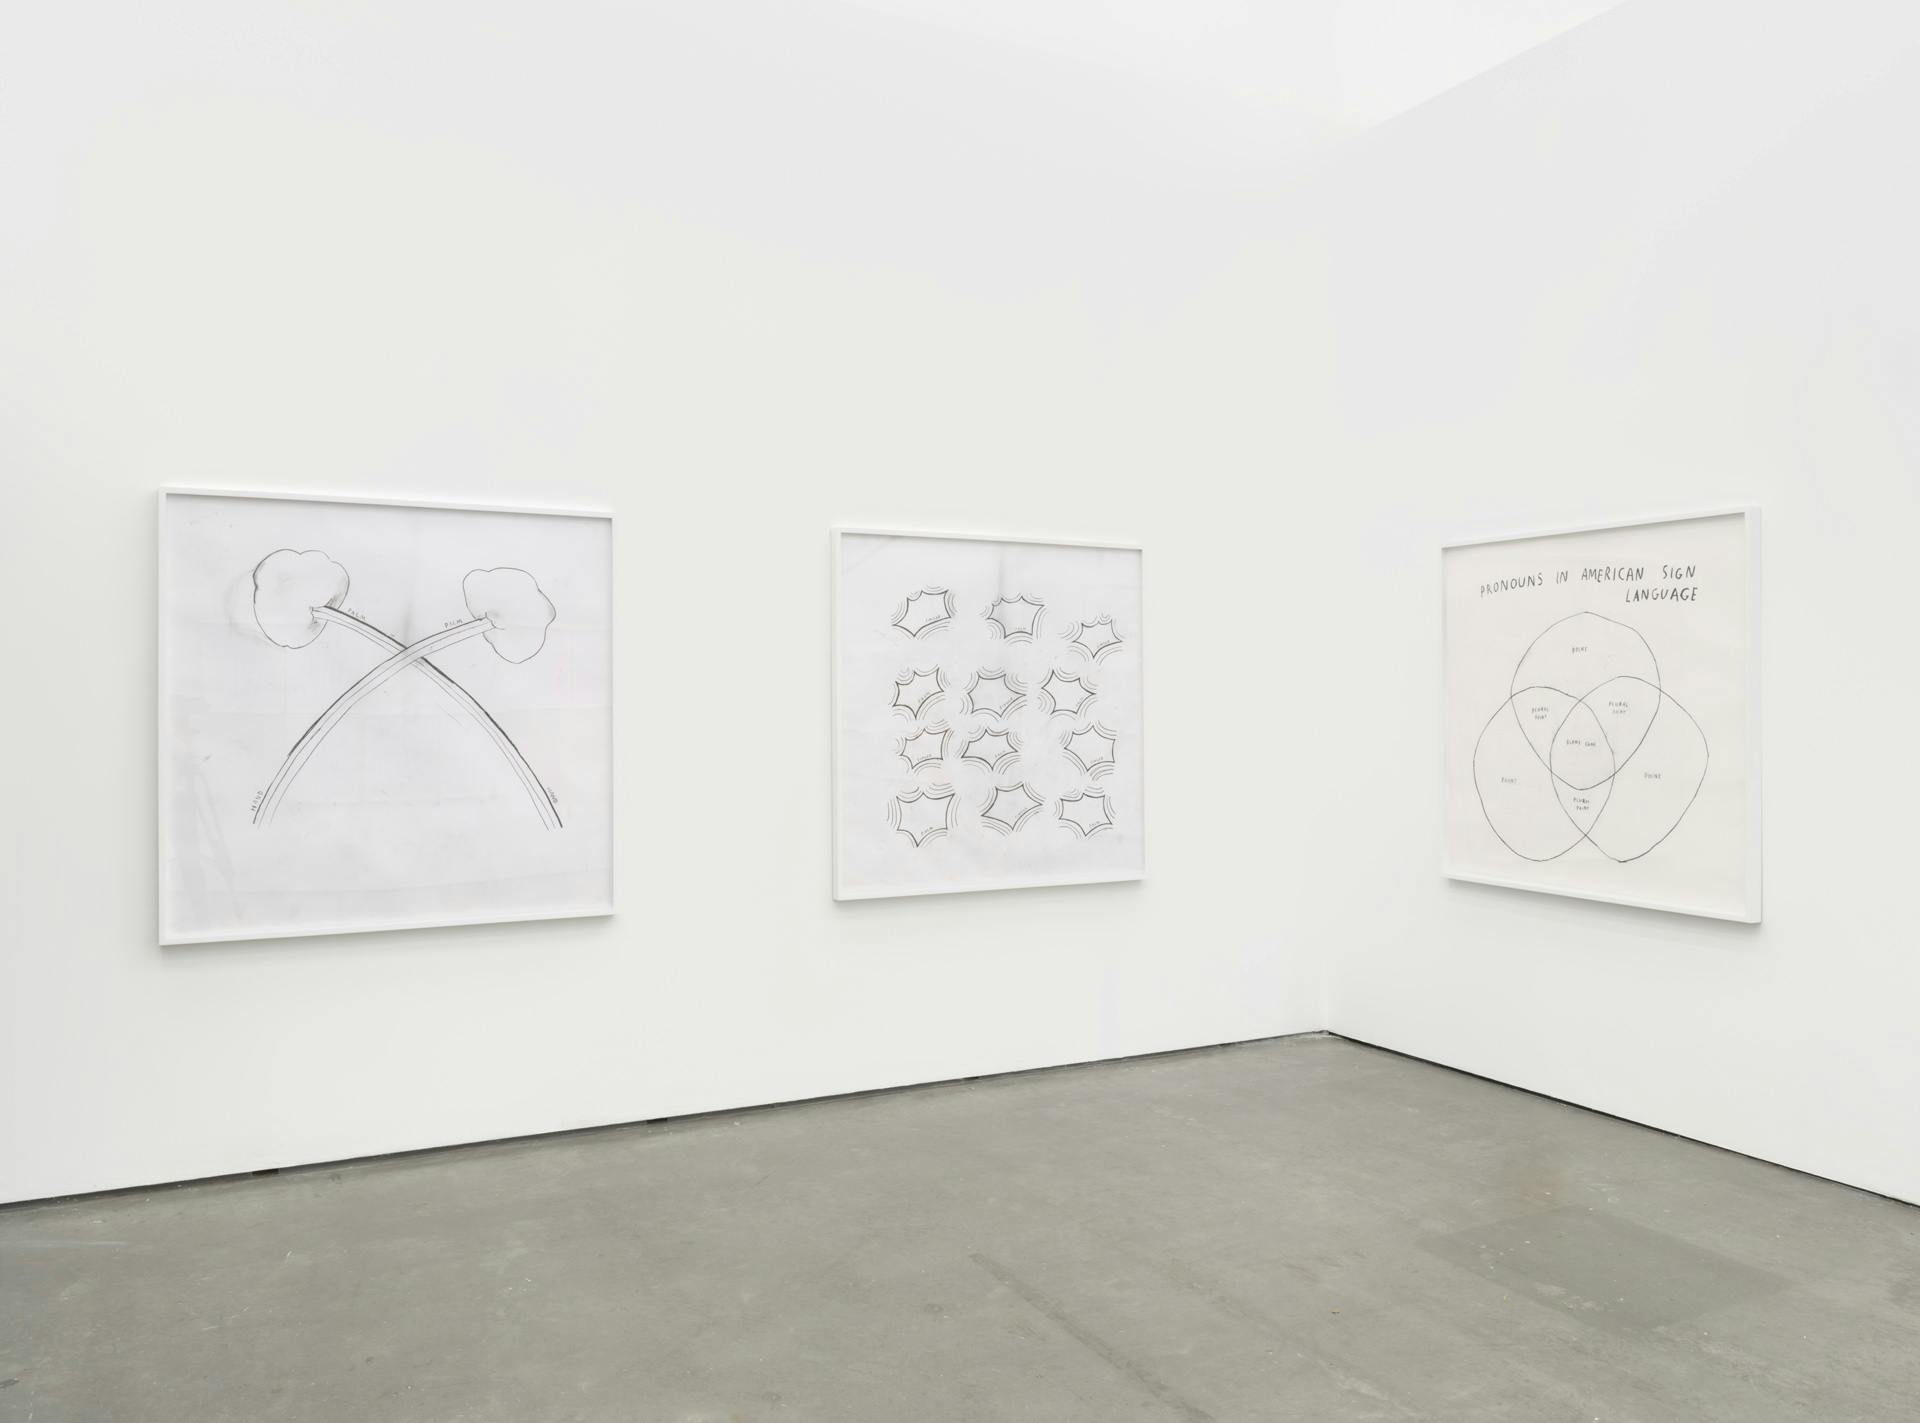 Three line drawings by Christine Sun Kim arranged across a corner on white walls. One drawing features a venn diagram and the words "pronouns in american sign language."